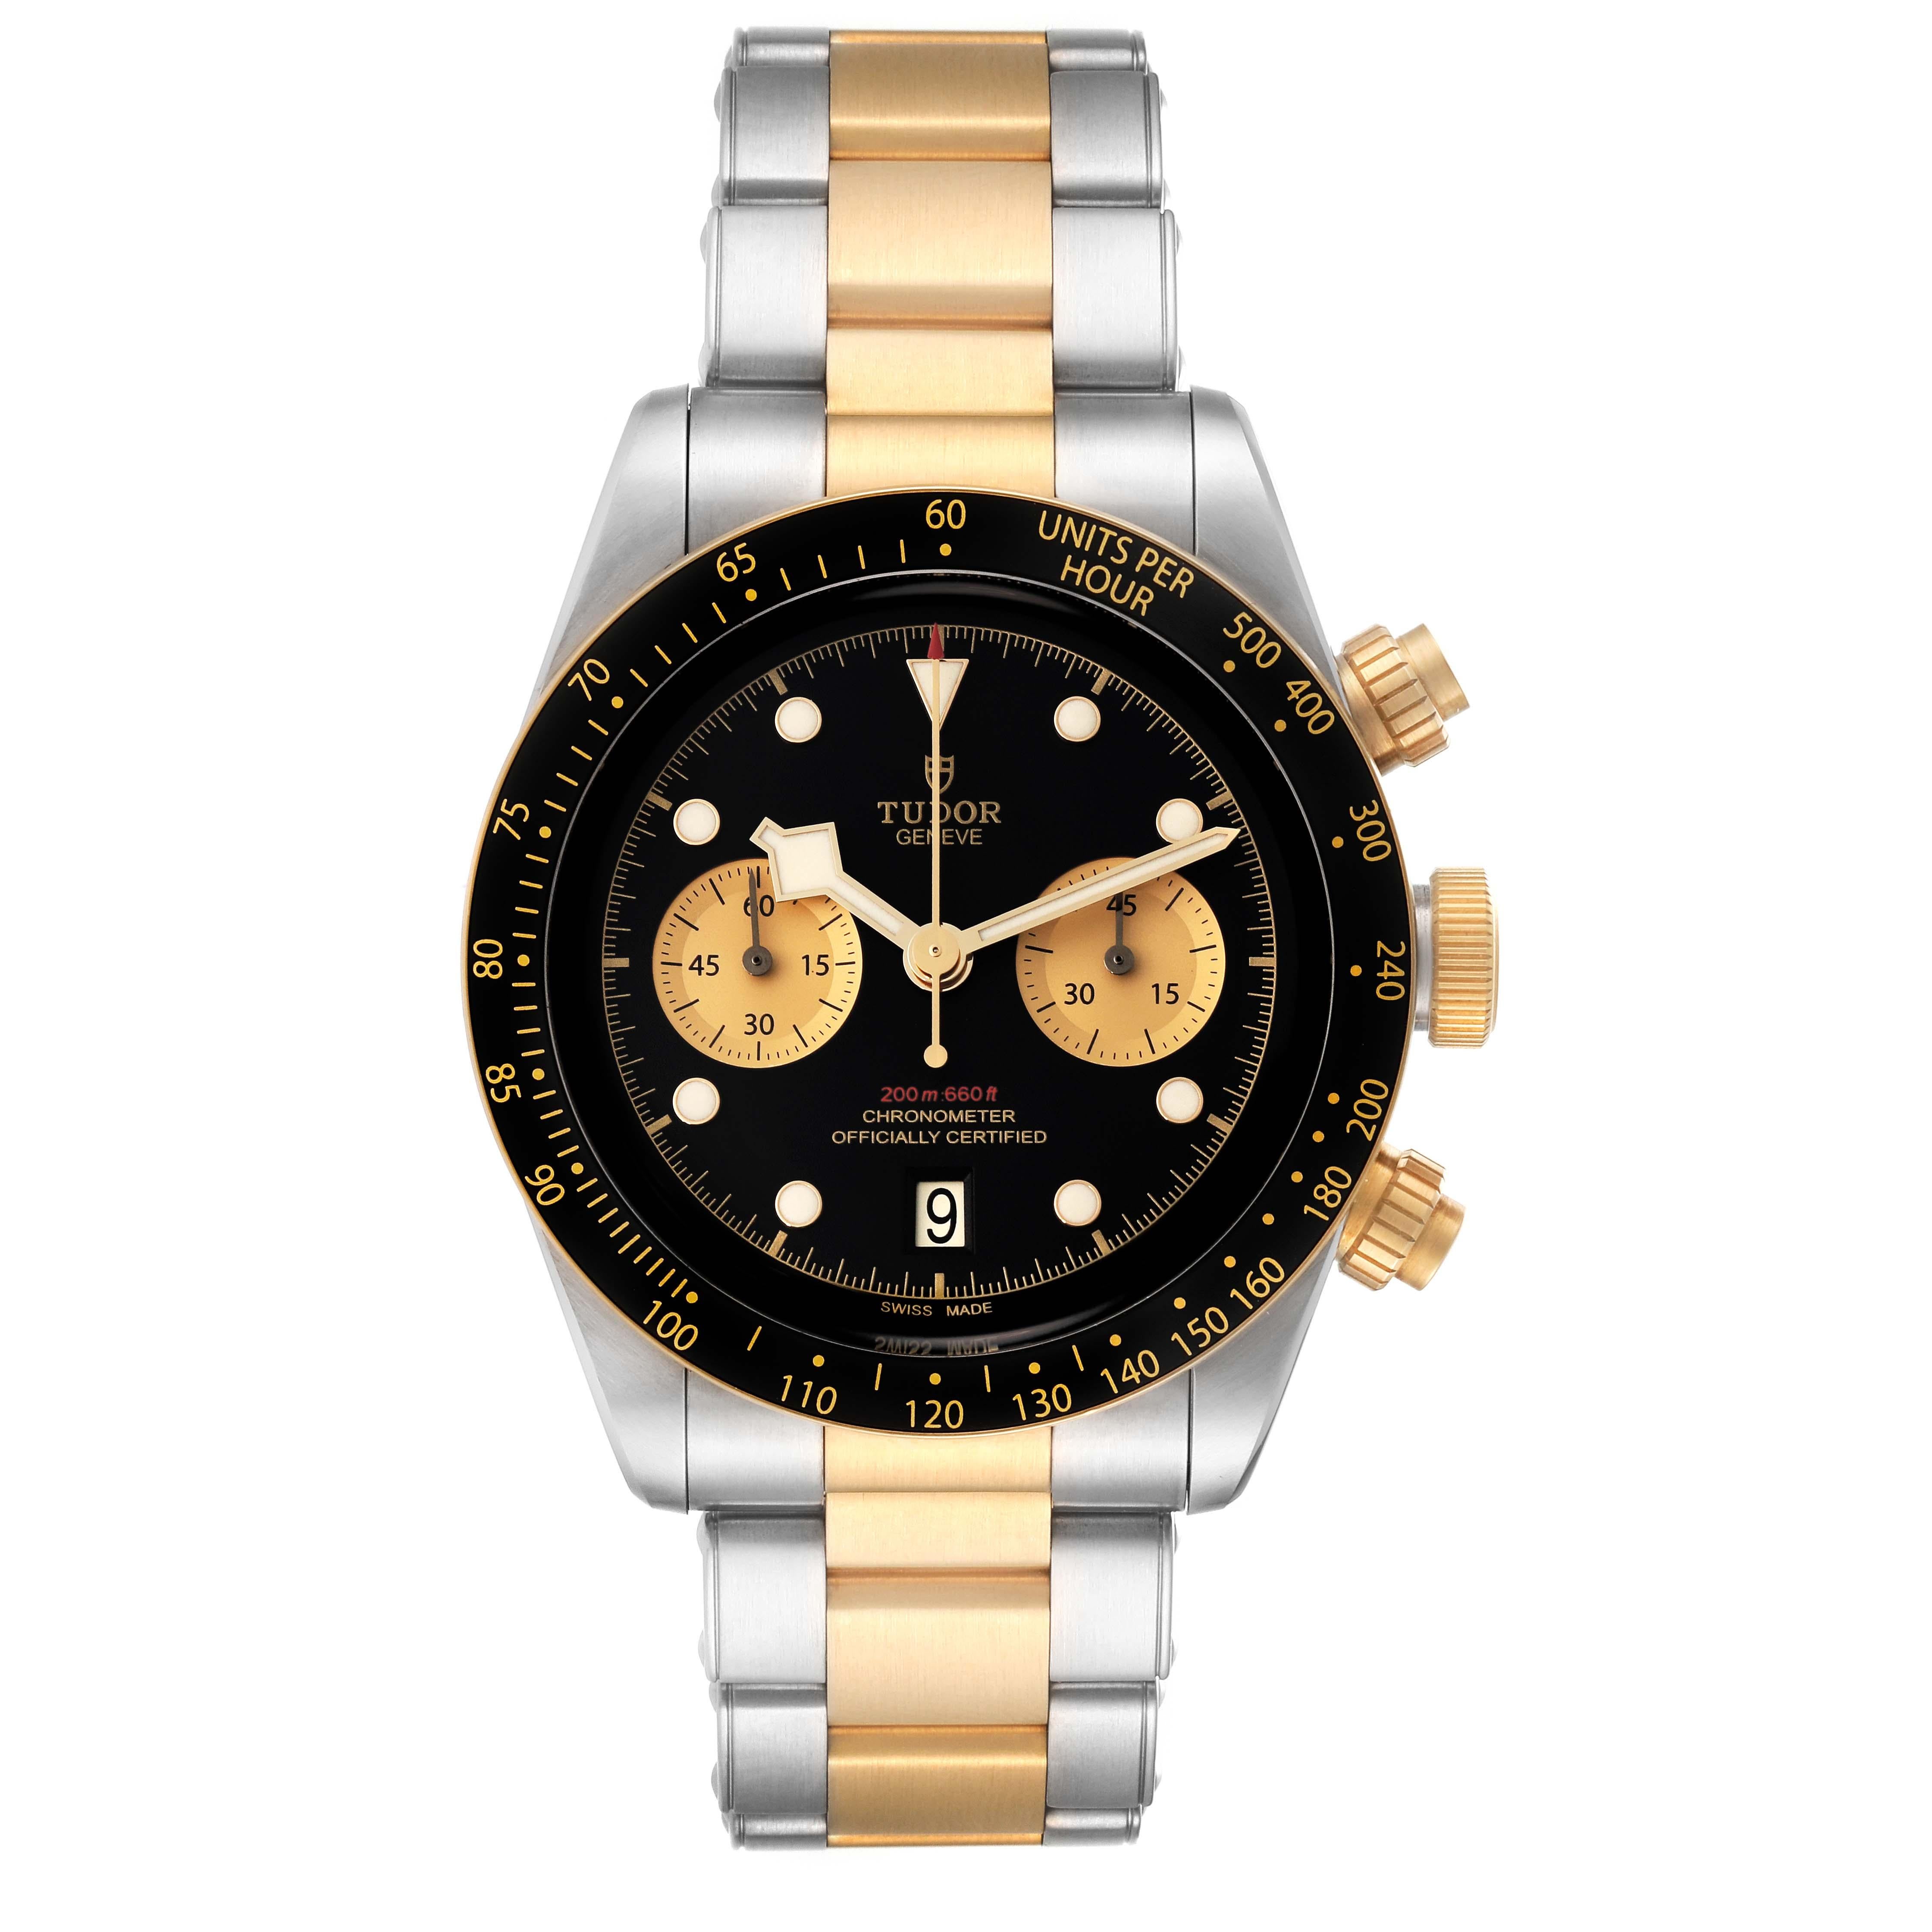 Tudor Heritage Black Bay Steel Yellow Gold Mens Watch 79363 Unworn. Automatic self-winding movement. Stainless steel and 18K yellow gold oyster case 41 mm in diameter. Tudor logo on a crown. 18k yellow gold bezel with a black anodised aluminium ring